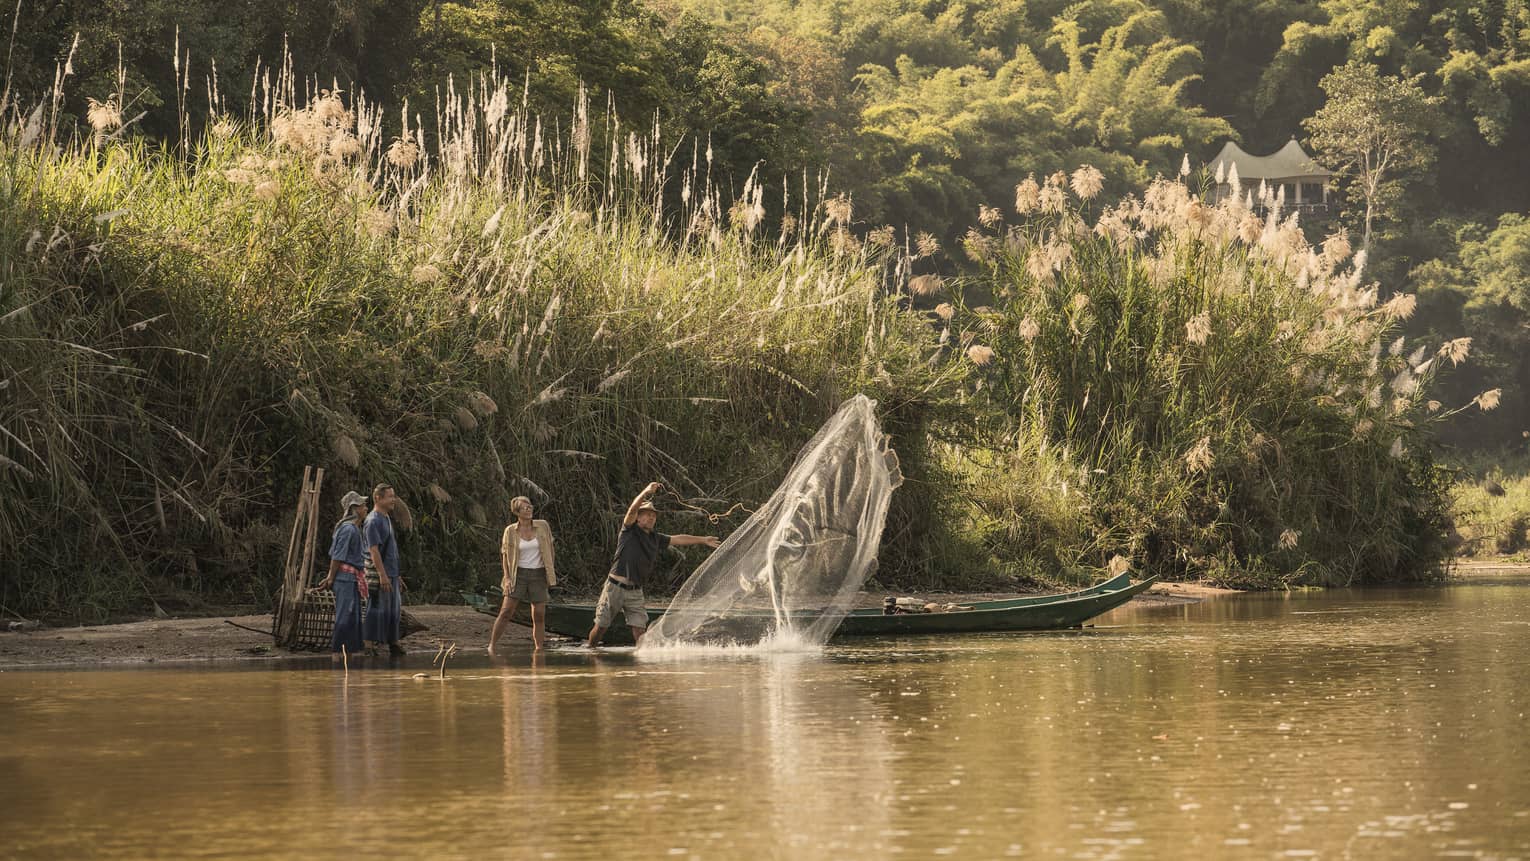 Man throws traditional Thai fishing net from boat into river during group activity